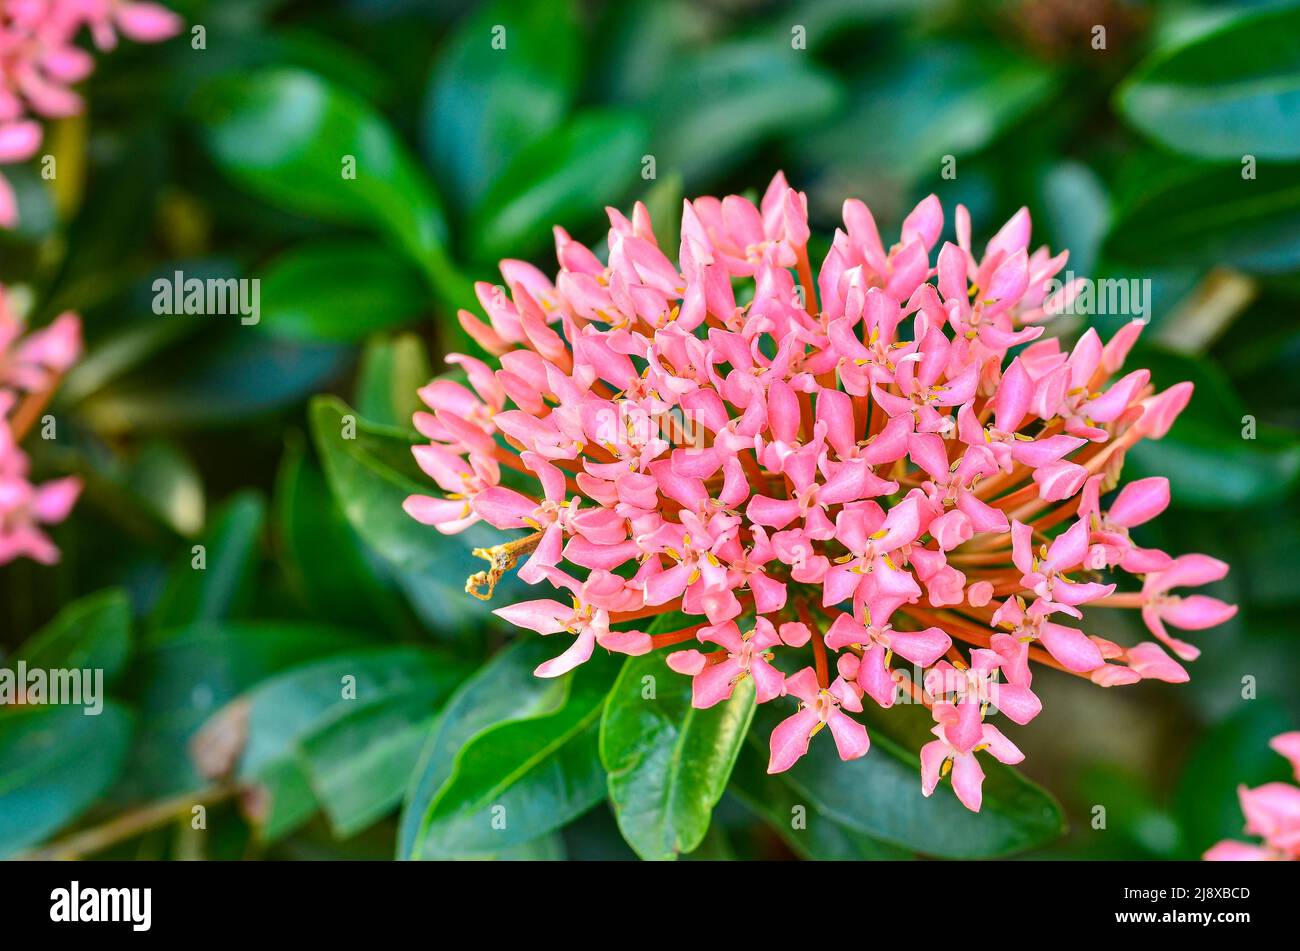 Pink ixora flowers blooming in the garden Stock Photo